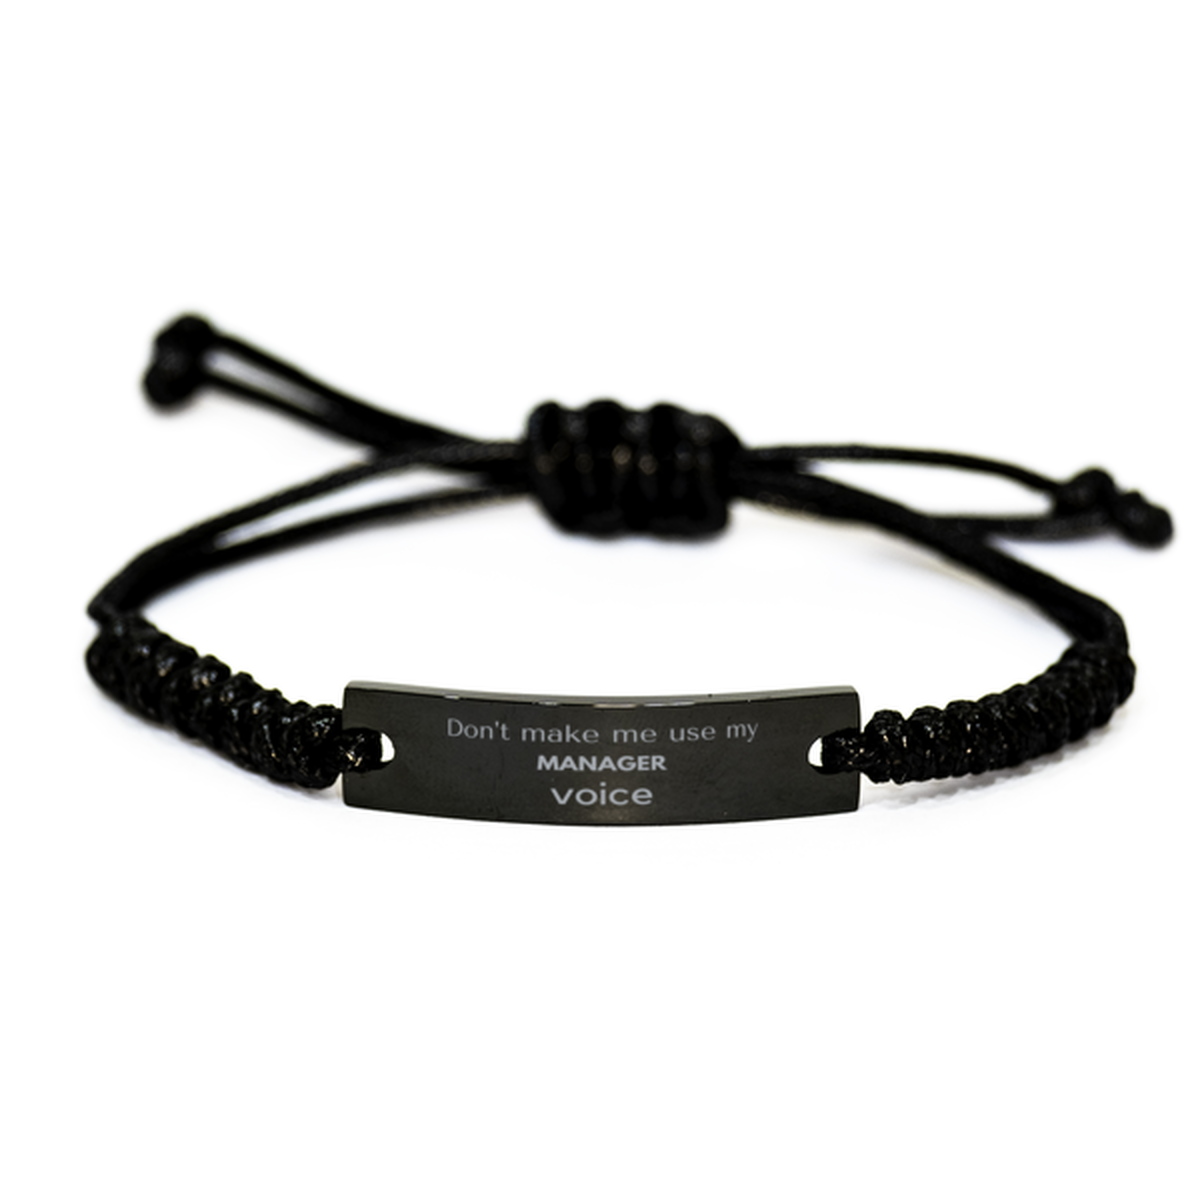 Don't make me use my Manager voice, Sarcasm Manager Gifts, Christmas Manager Black Rope Bracelet Birthday Unique Gifts For Manager Coworkers, Men, Women, Colleague, Friends